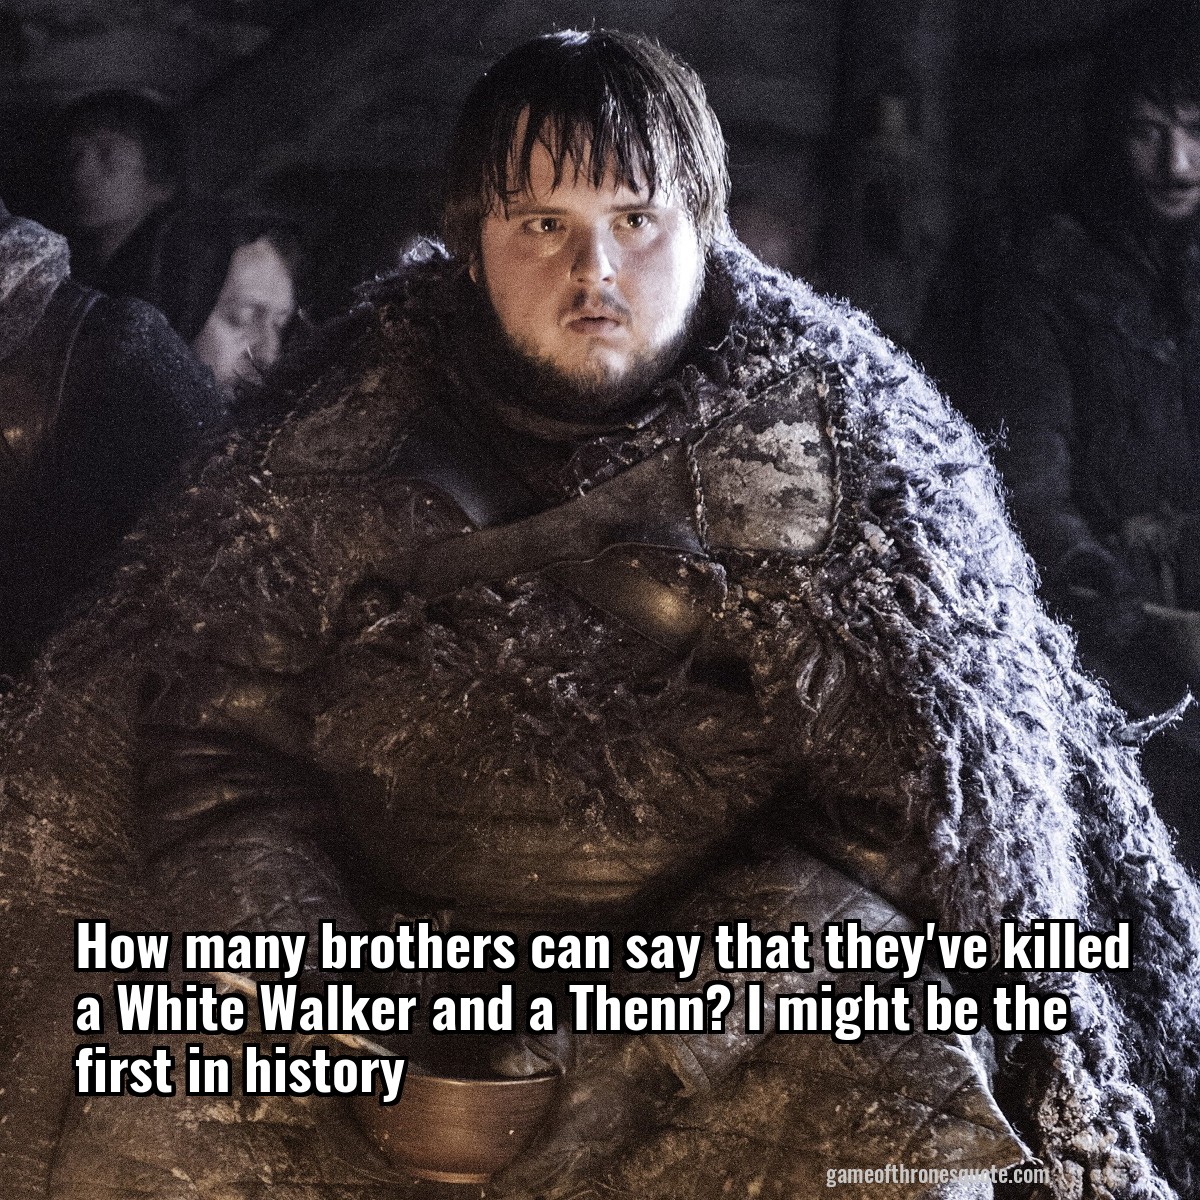 How many brothers can say that they've killed a White Walker and a Thenn? I might be the first in history